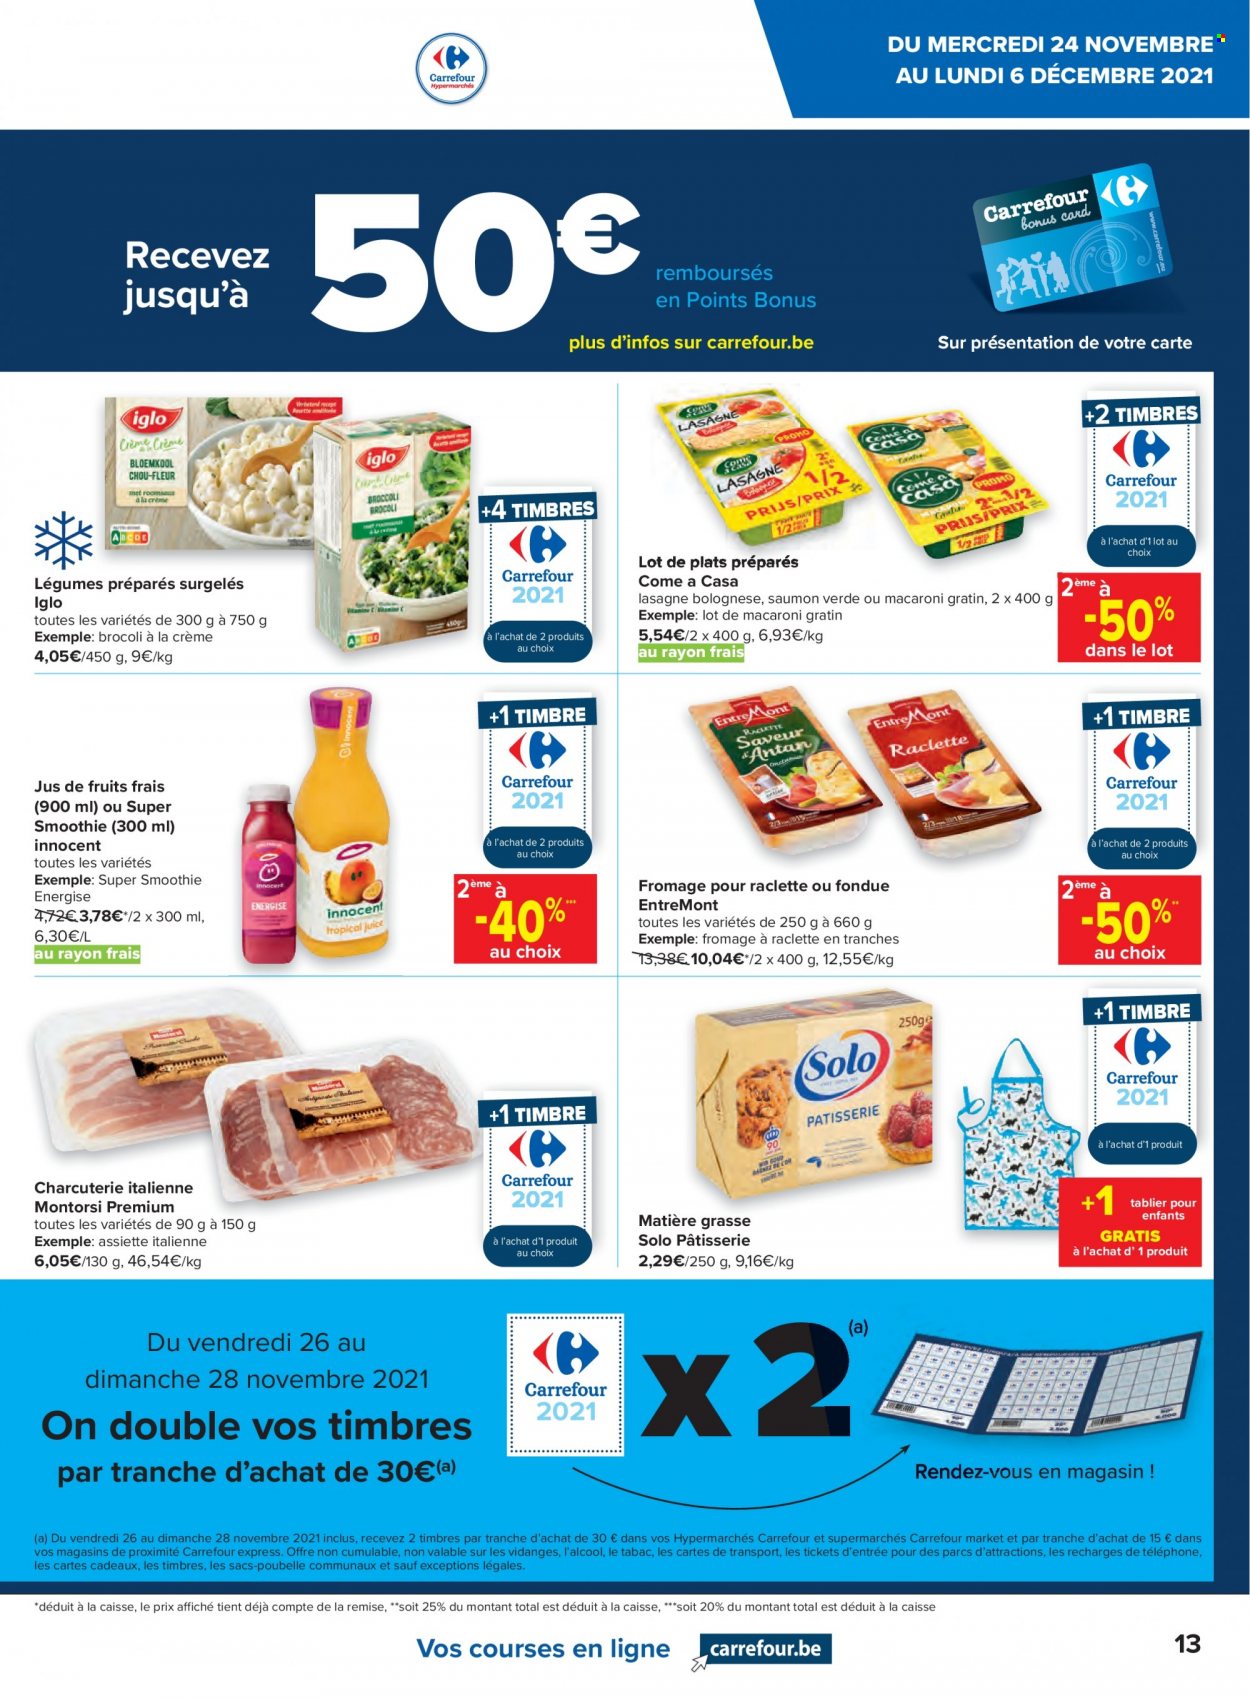 Catalogue Carrefour hypermarkt - 24.11.2021 - 6.12.2021. Page 13.